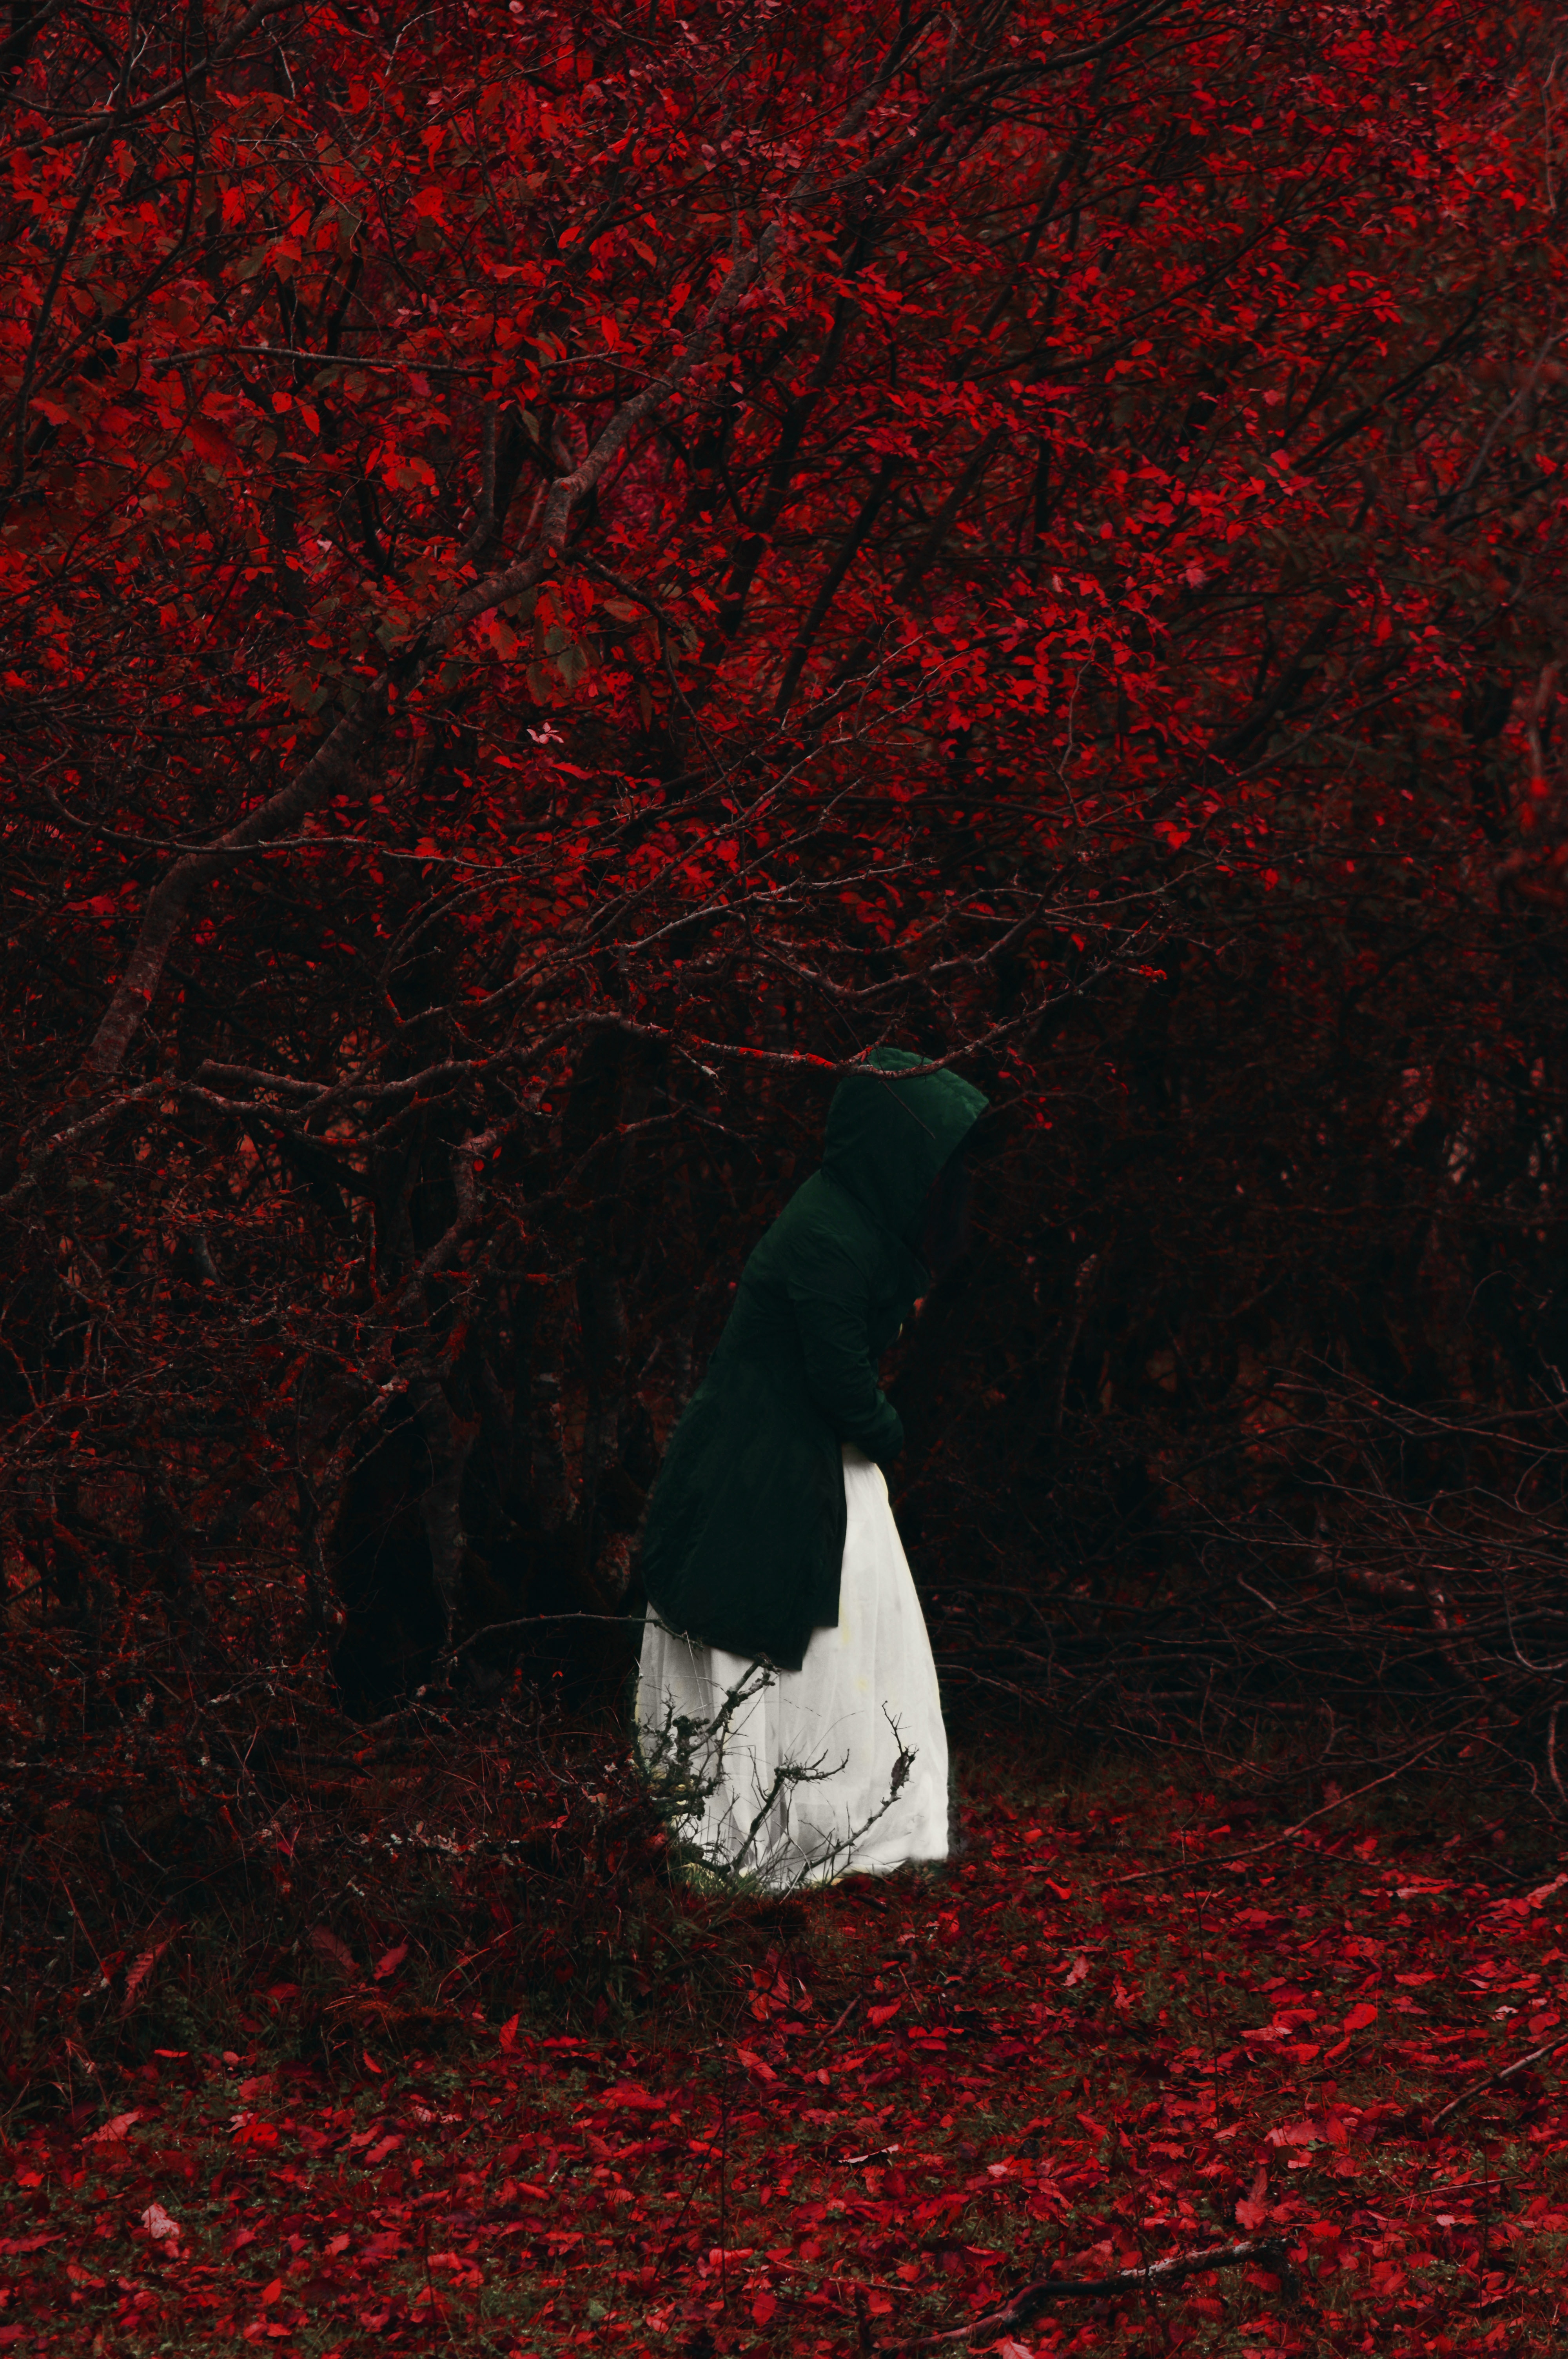 Free HD alone, foliage, autumn, hood, nature, red, forest, human, person, loneliness, lonely